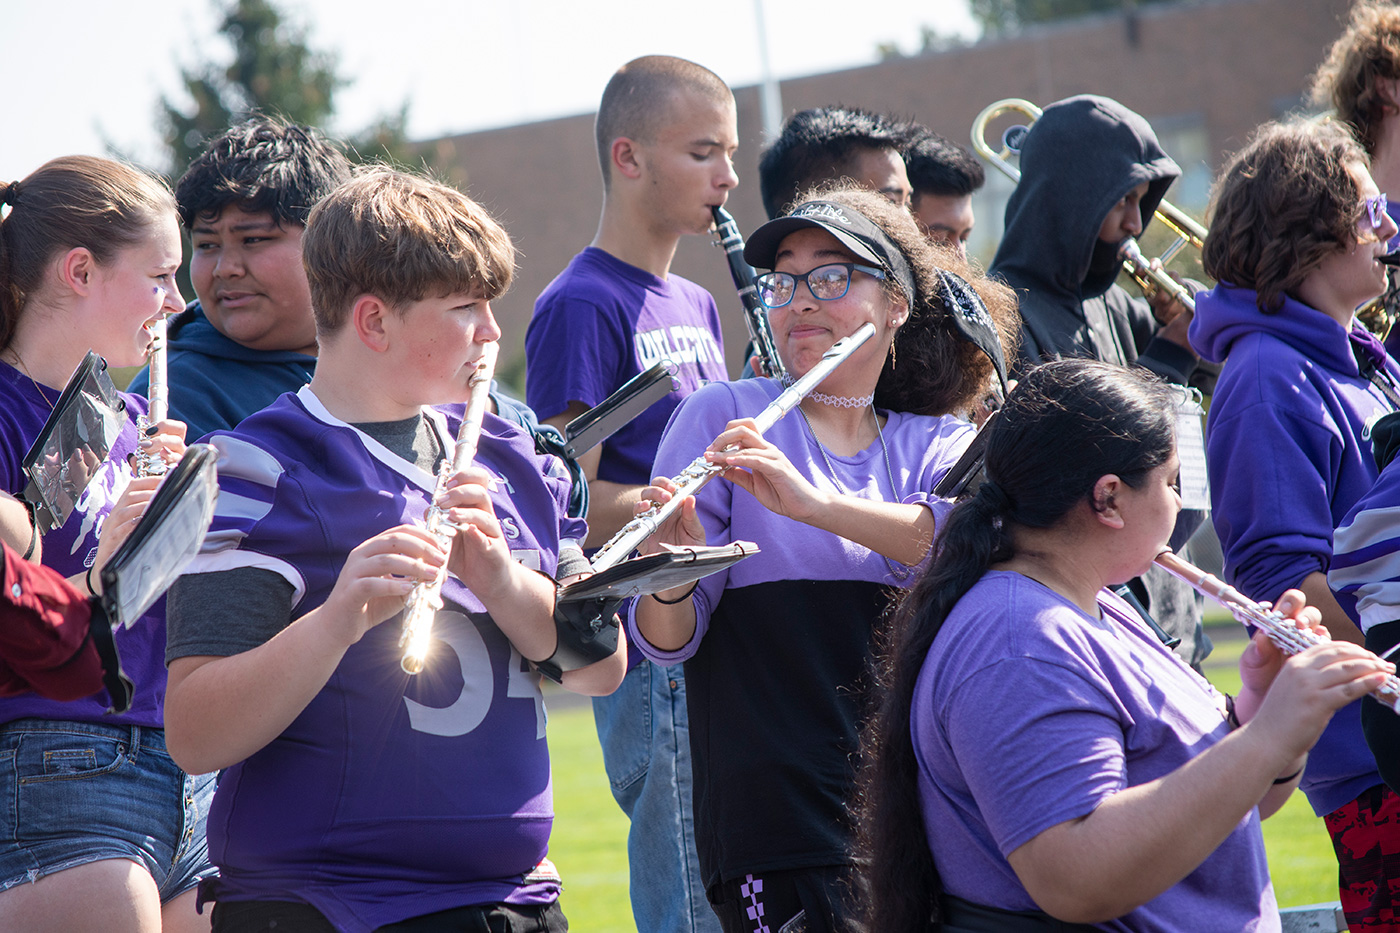 Green Bay West High School Band members playing outside.